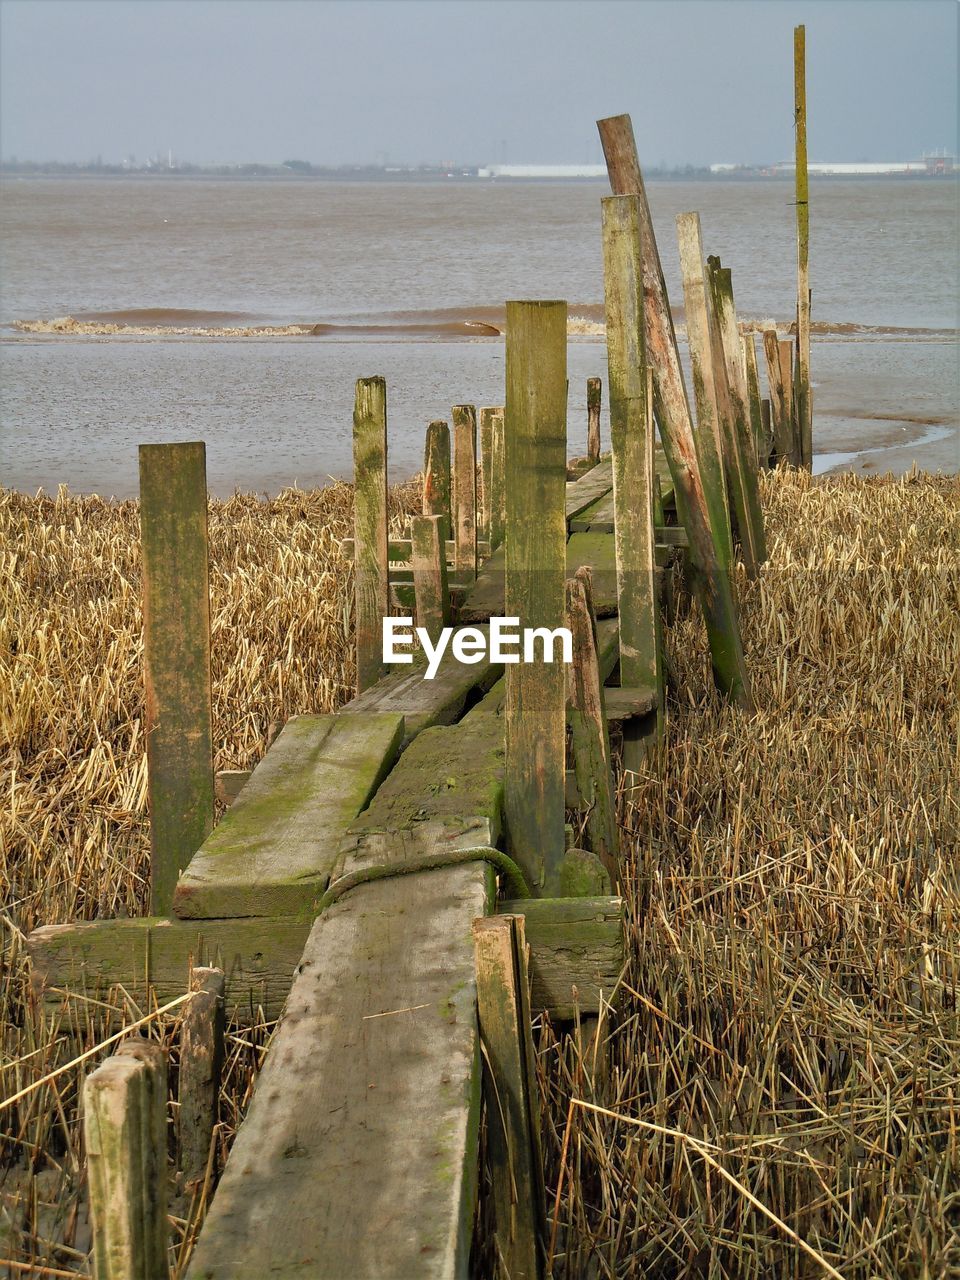 PANORAMIC VIEW OF WOODEN POST ON BEACH